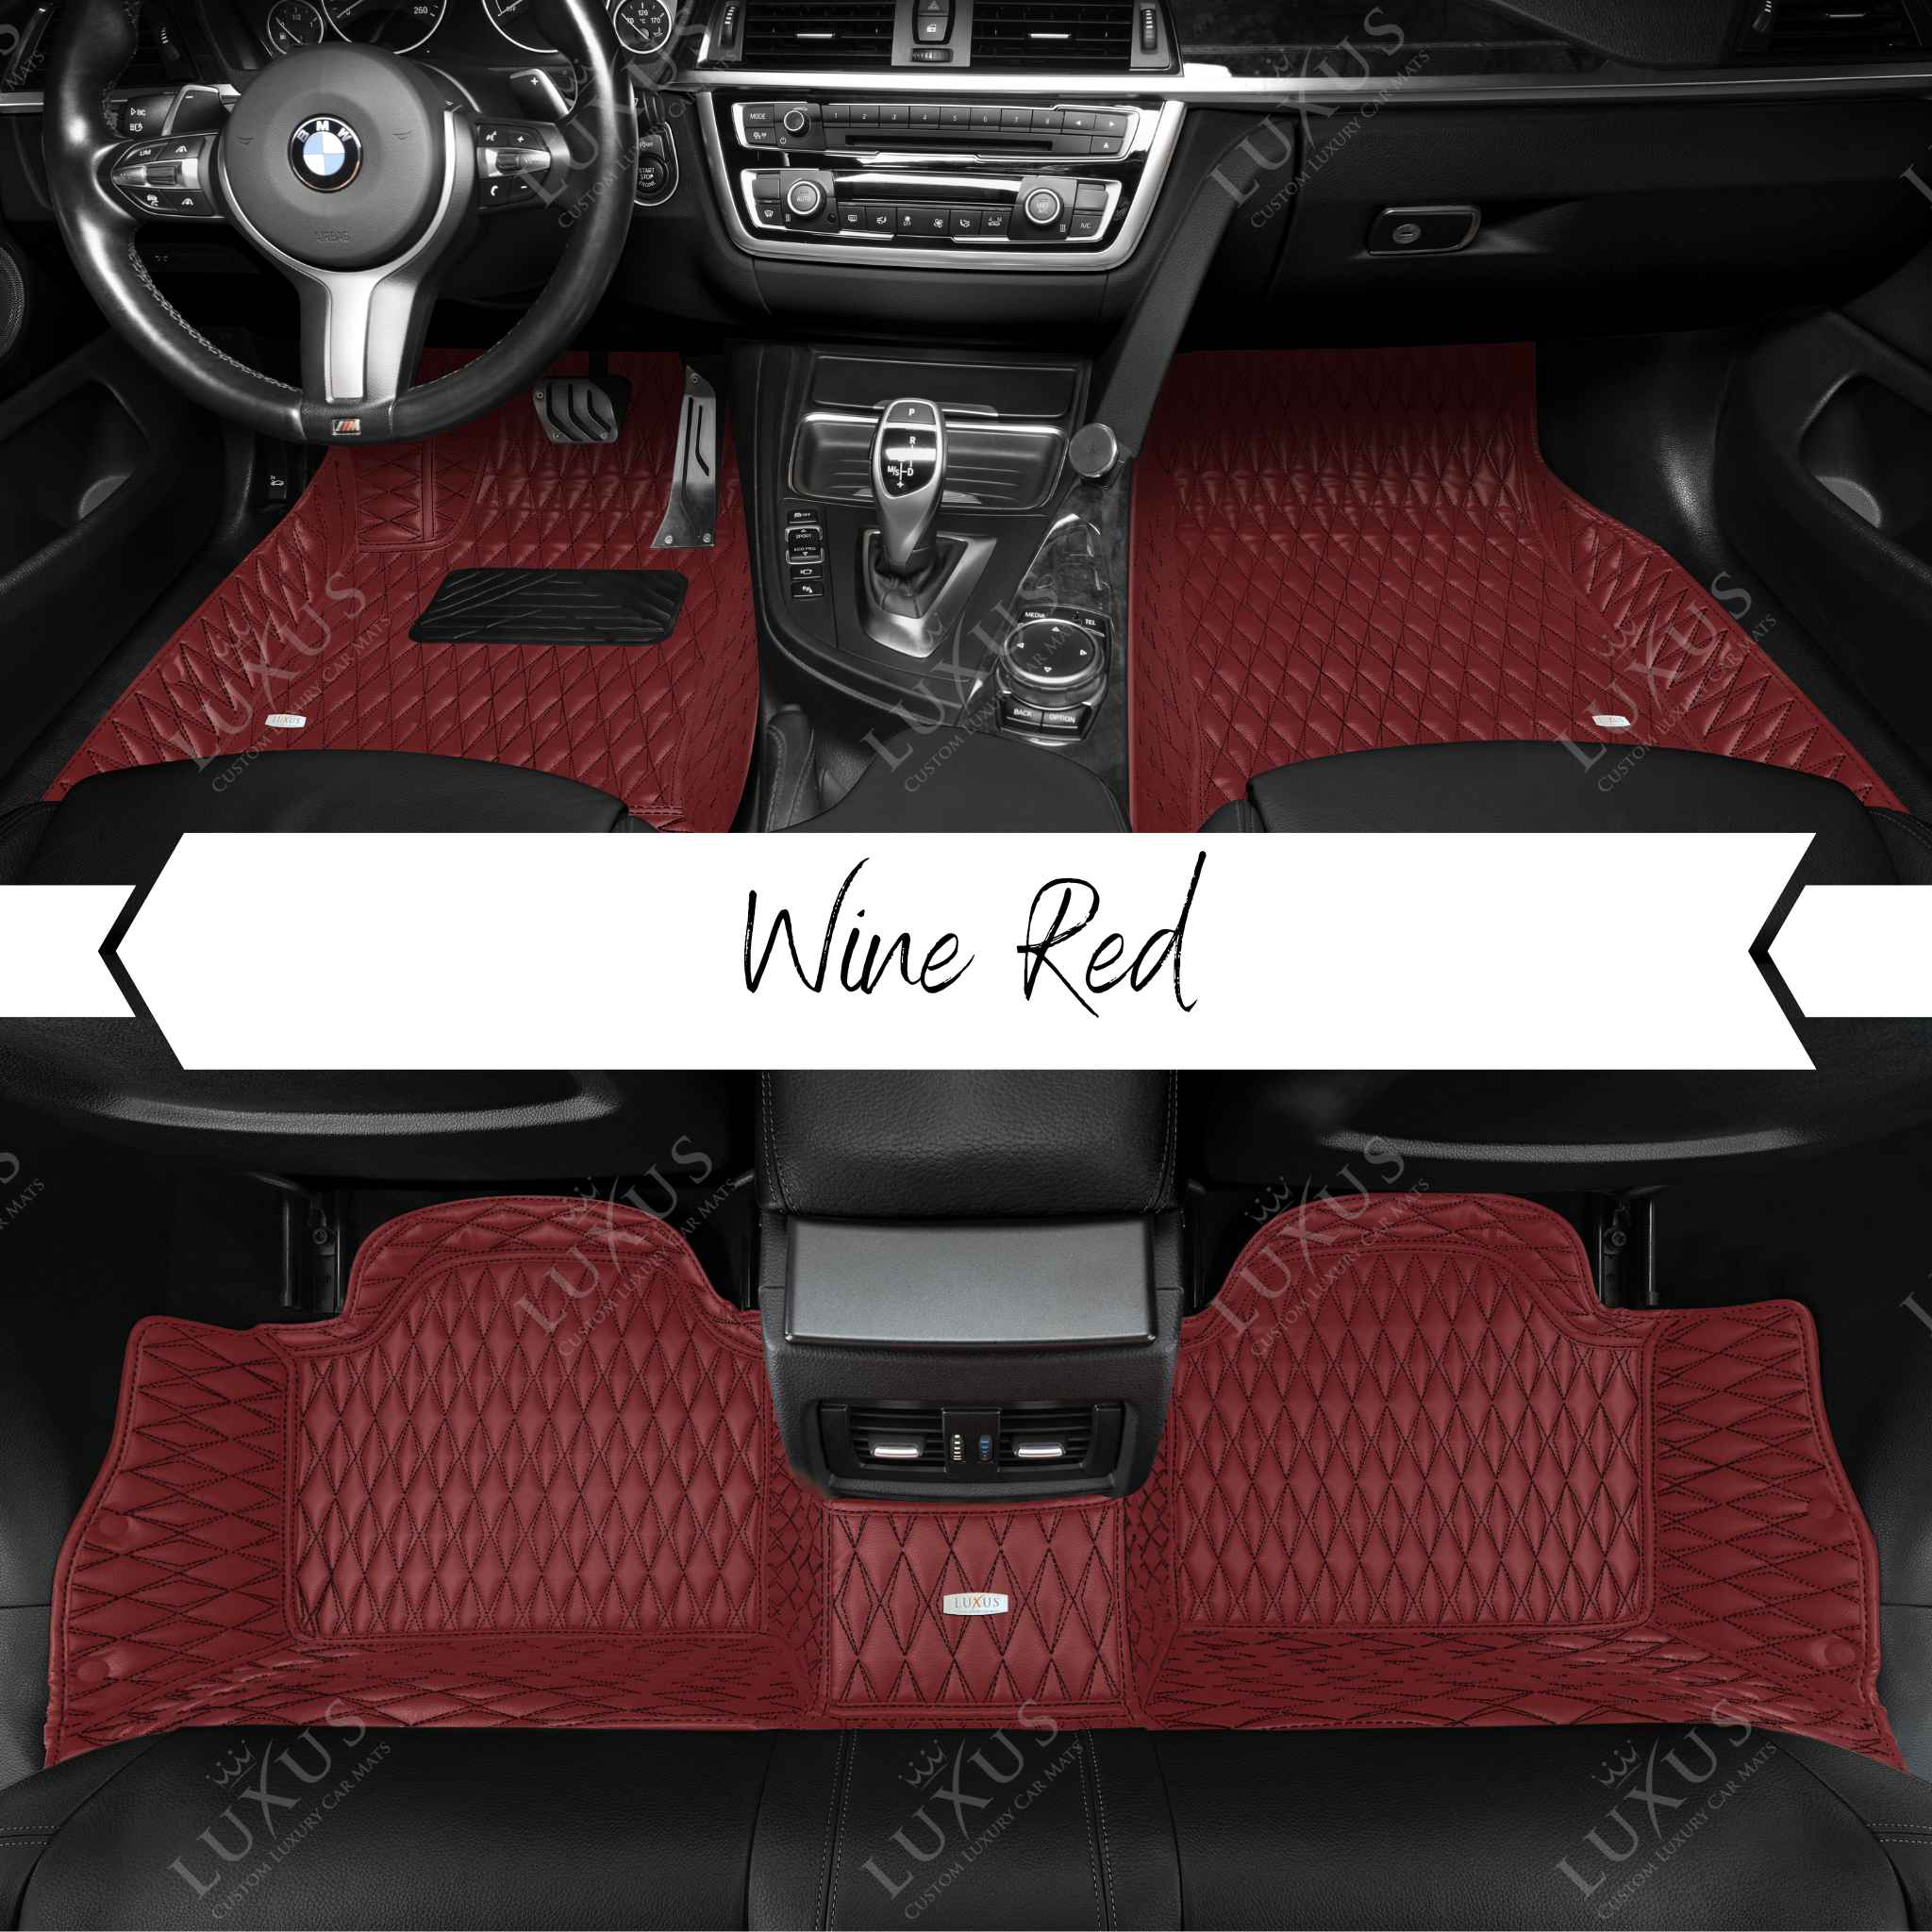 Trunk Mats For Car, Truck & SUV Luxus Car Mats Custom All-Weather  Waterproof Diamond Auto Boot Liner Carpets Rugs Black Stitching